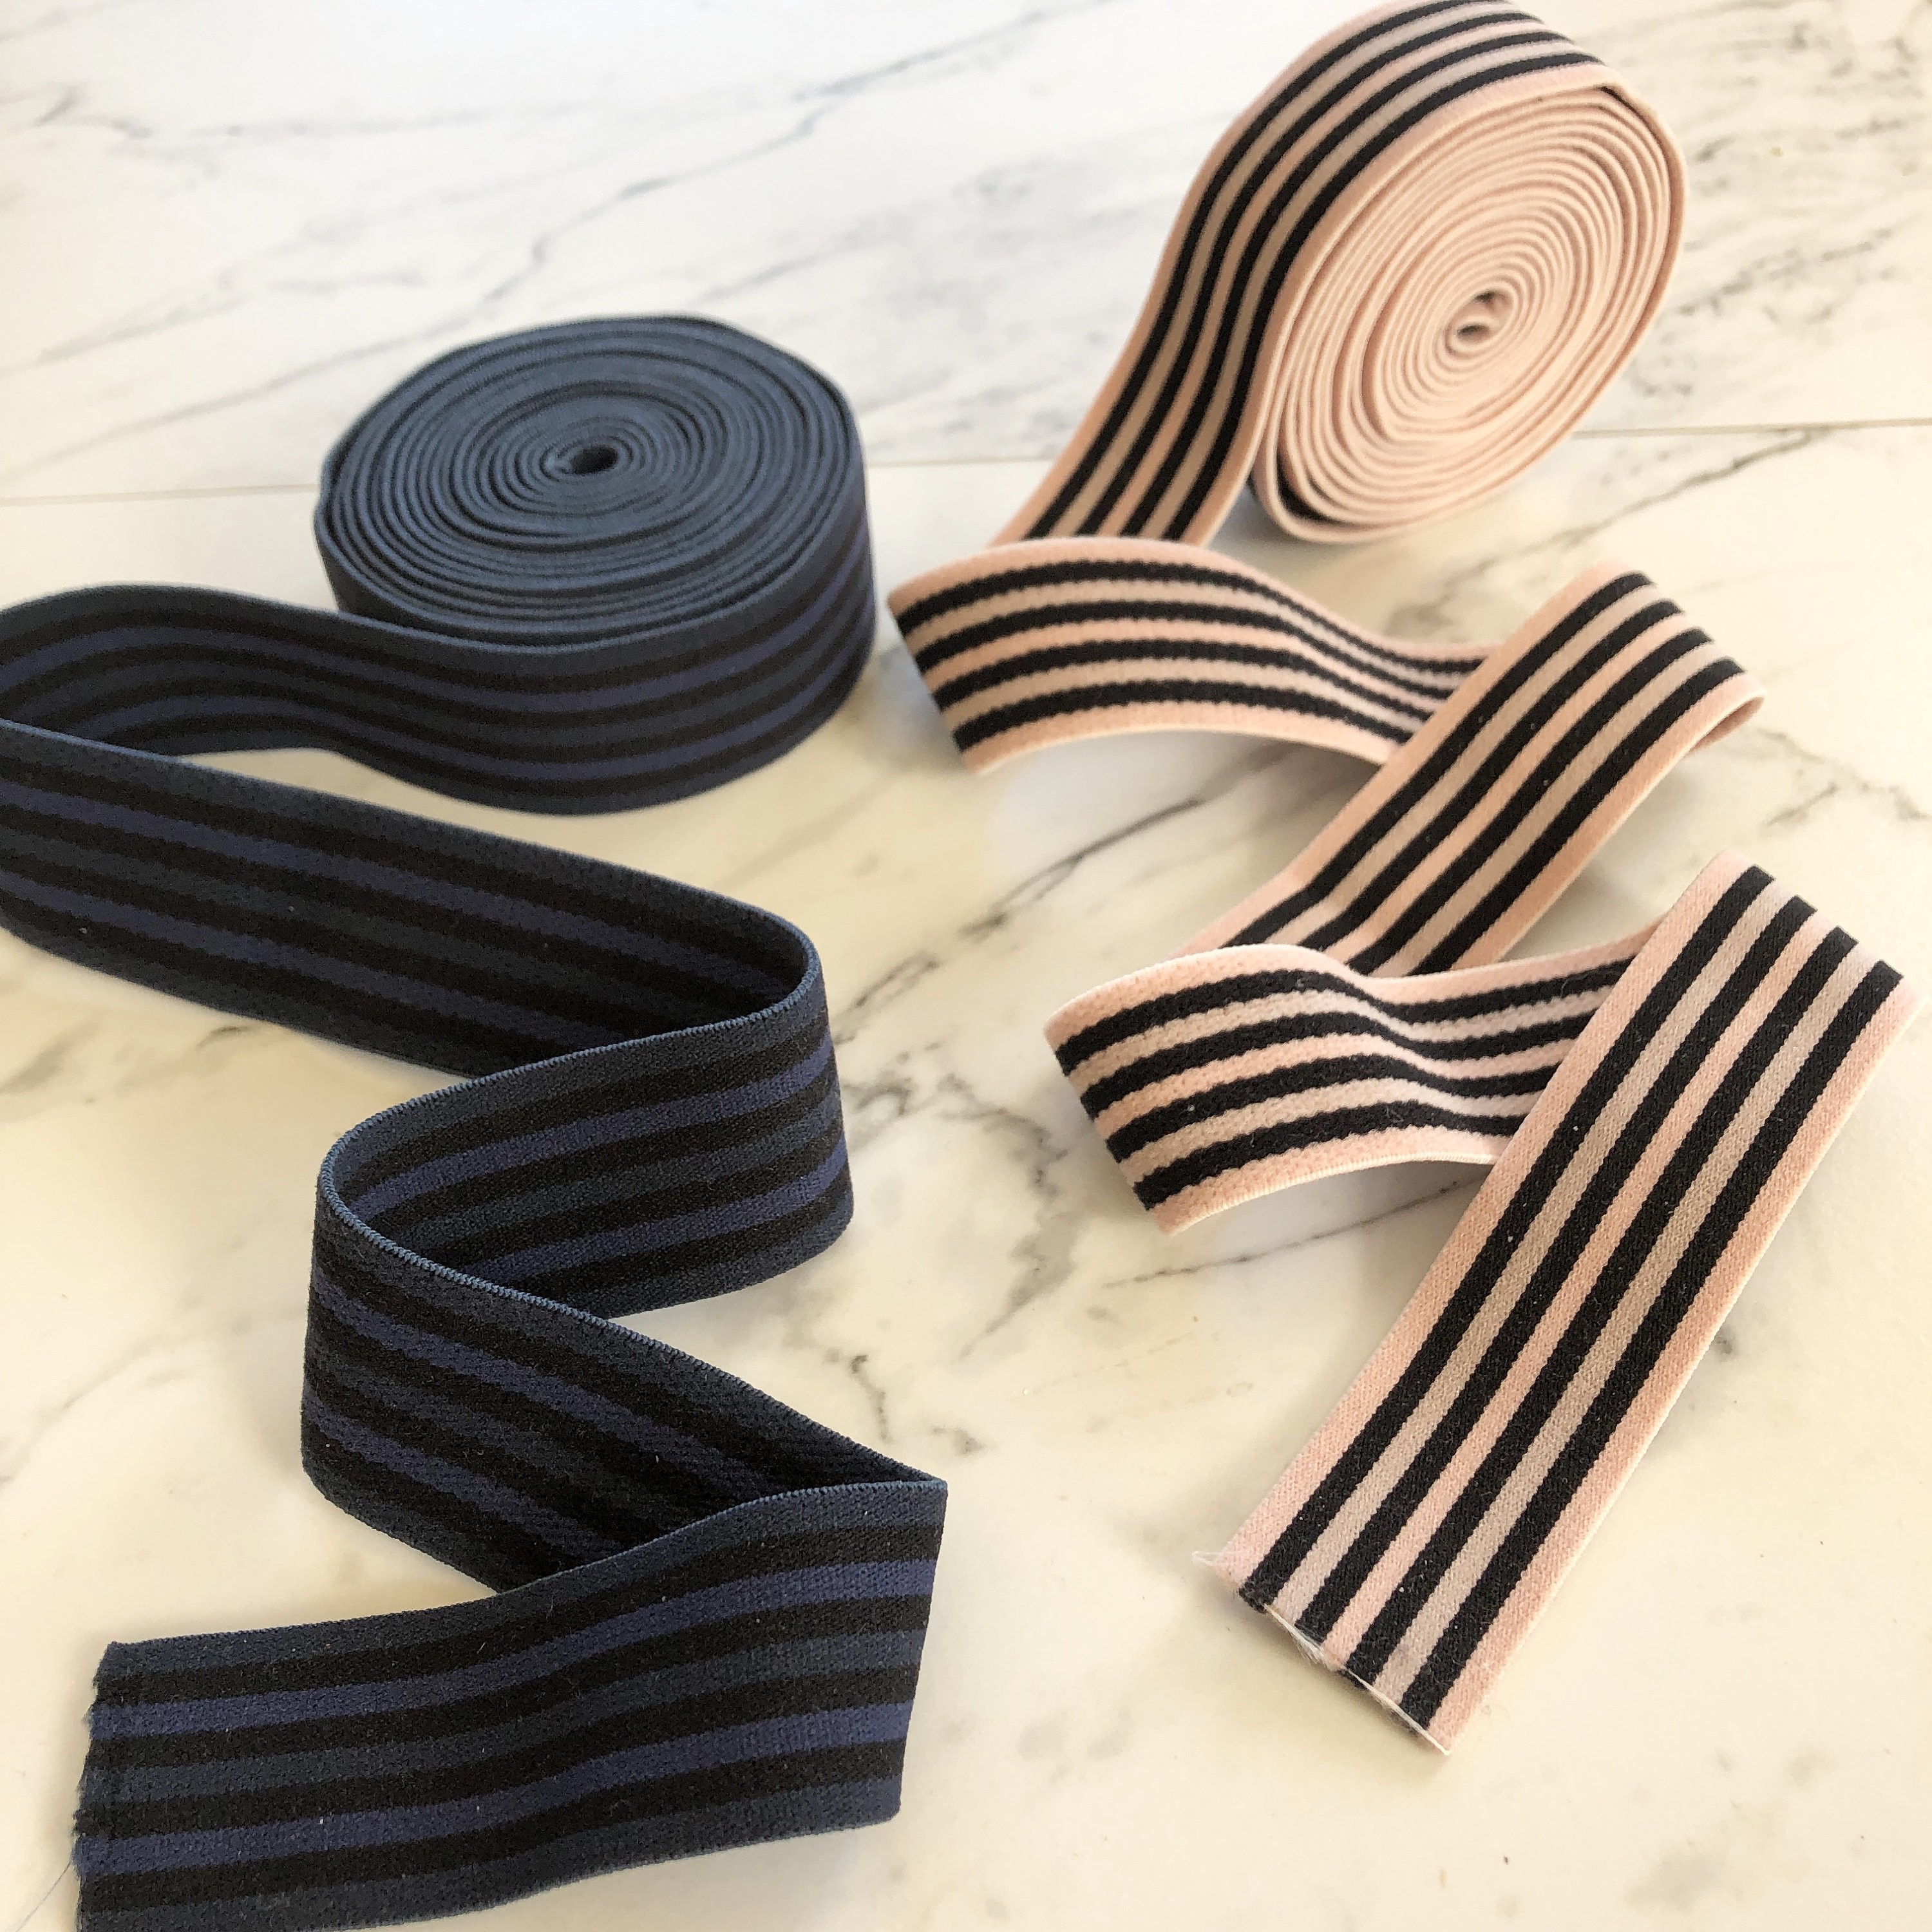 5cm Wide Elastic Band Nylon Stretchy Tape Sewing Rubber Bands